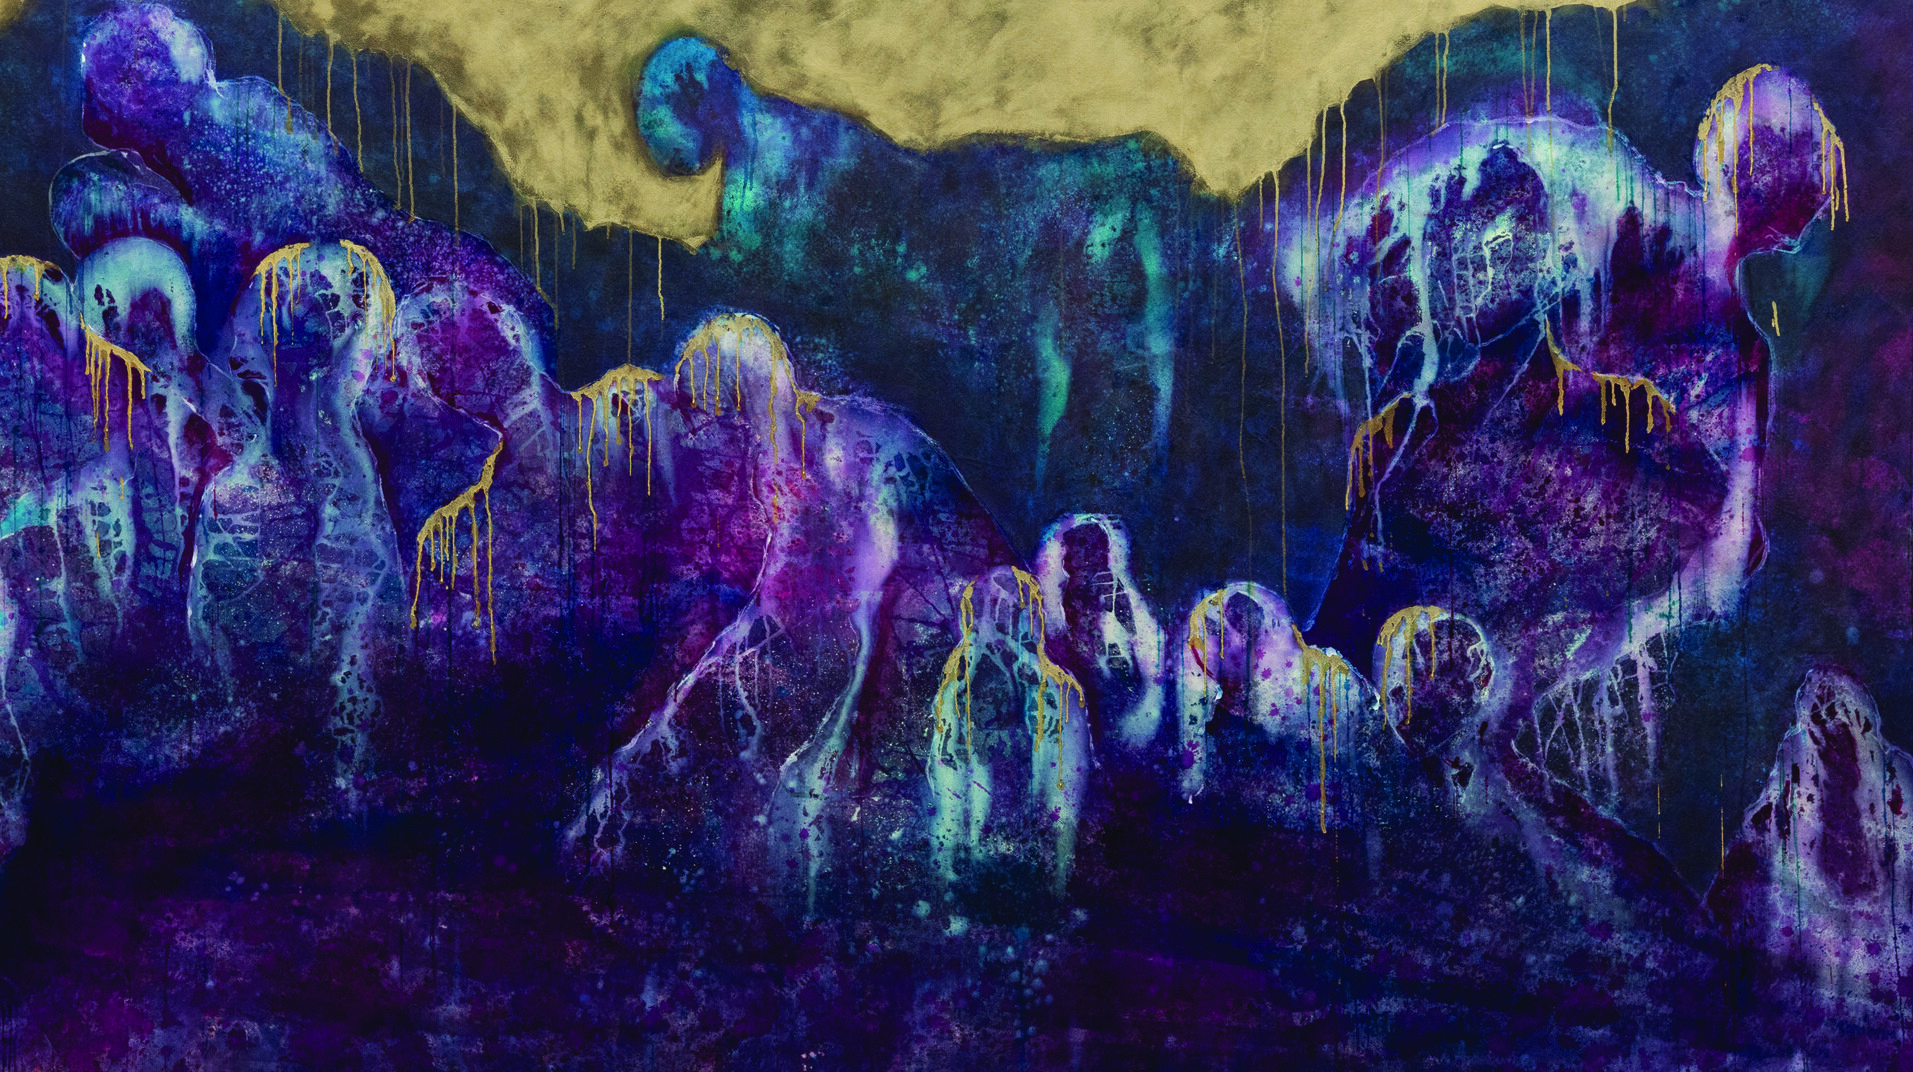 An abstract painting with purple-toned human-like figures against a gold backdrop with dark mountainous forms.